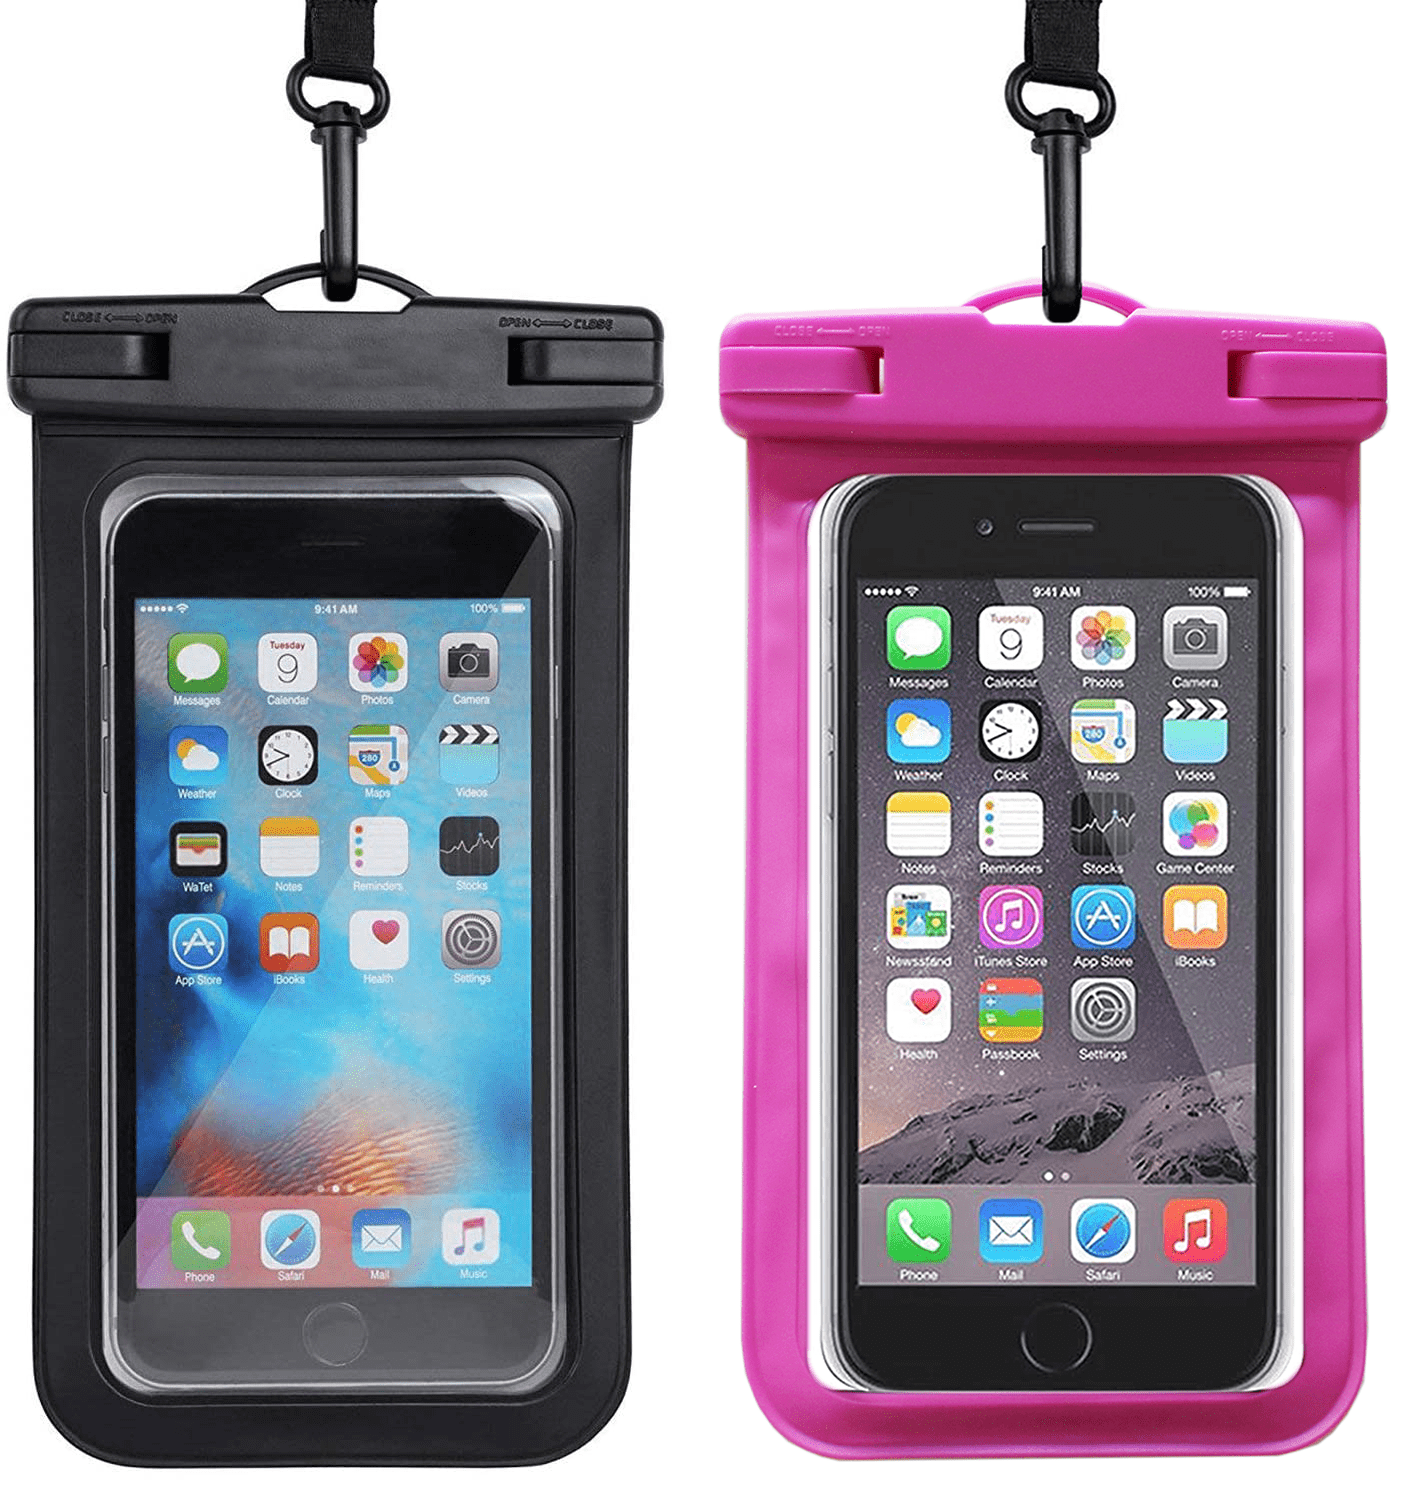 Takes Clear Photos Underwater TUFF HERO Universal Waterproof Phone Pouch Set of 2 Floating Waterproof Phone Case Includes Adjustable Neck Strap Lanyard Arm Band Fits All Phones up to 7 